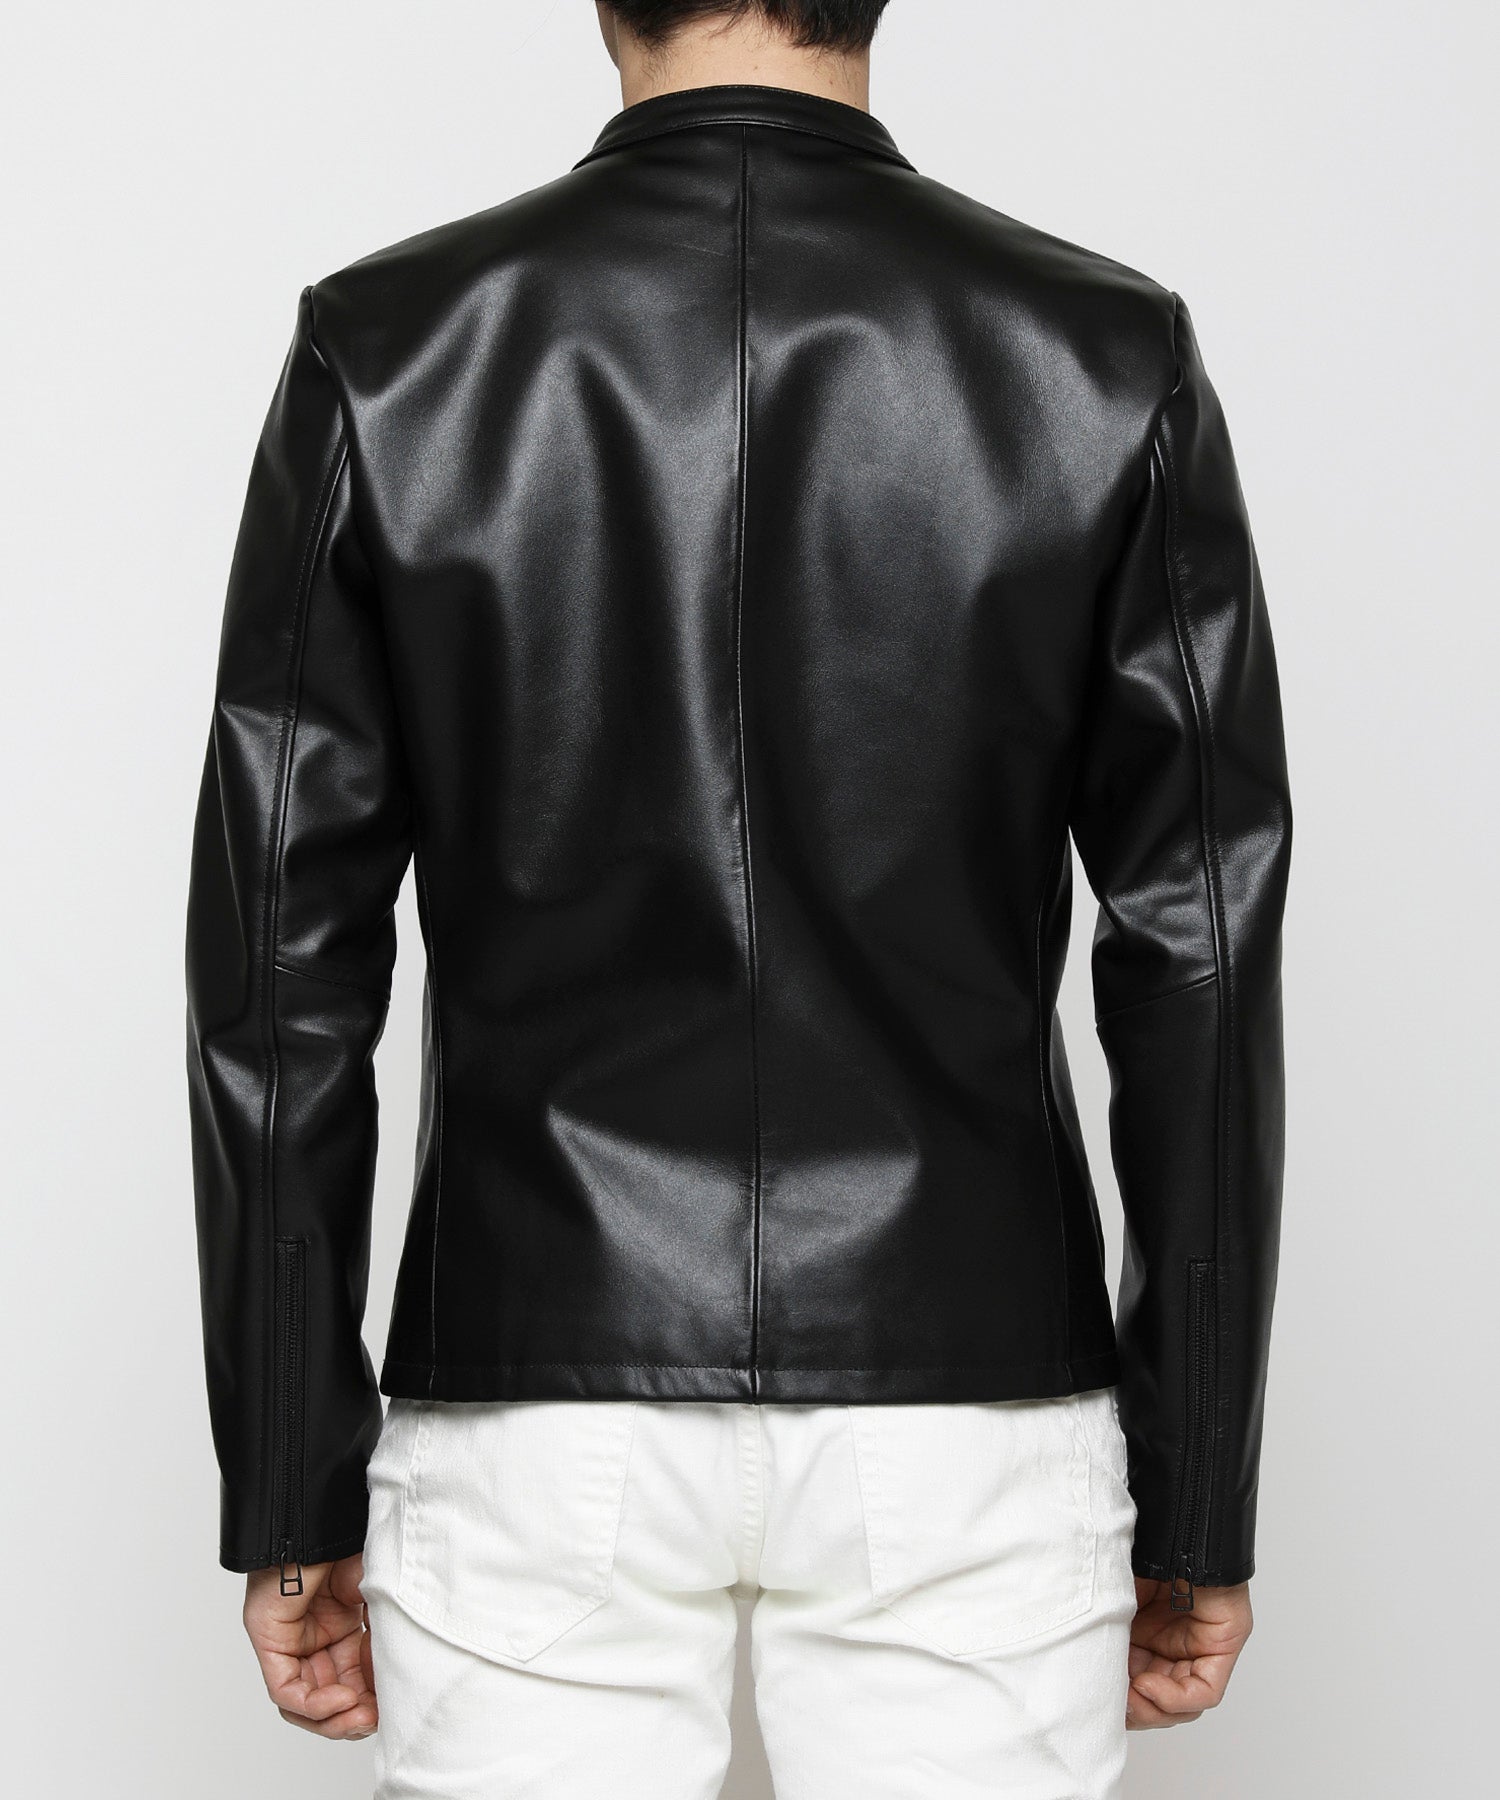 Cow Leather Single Riders Jacket [VJJ080]